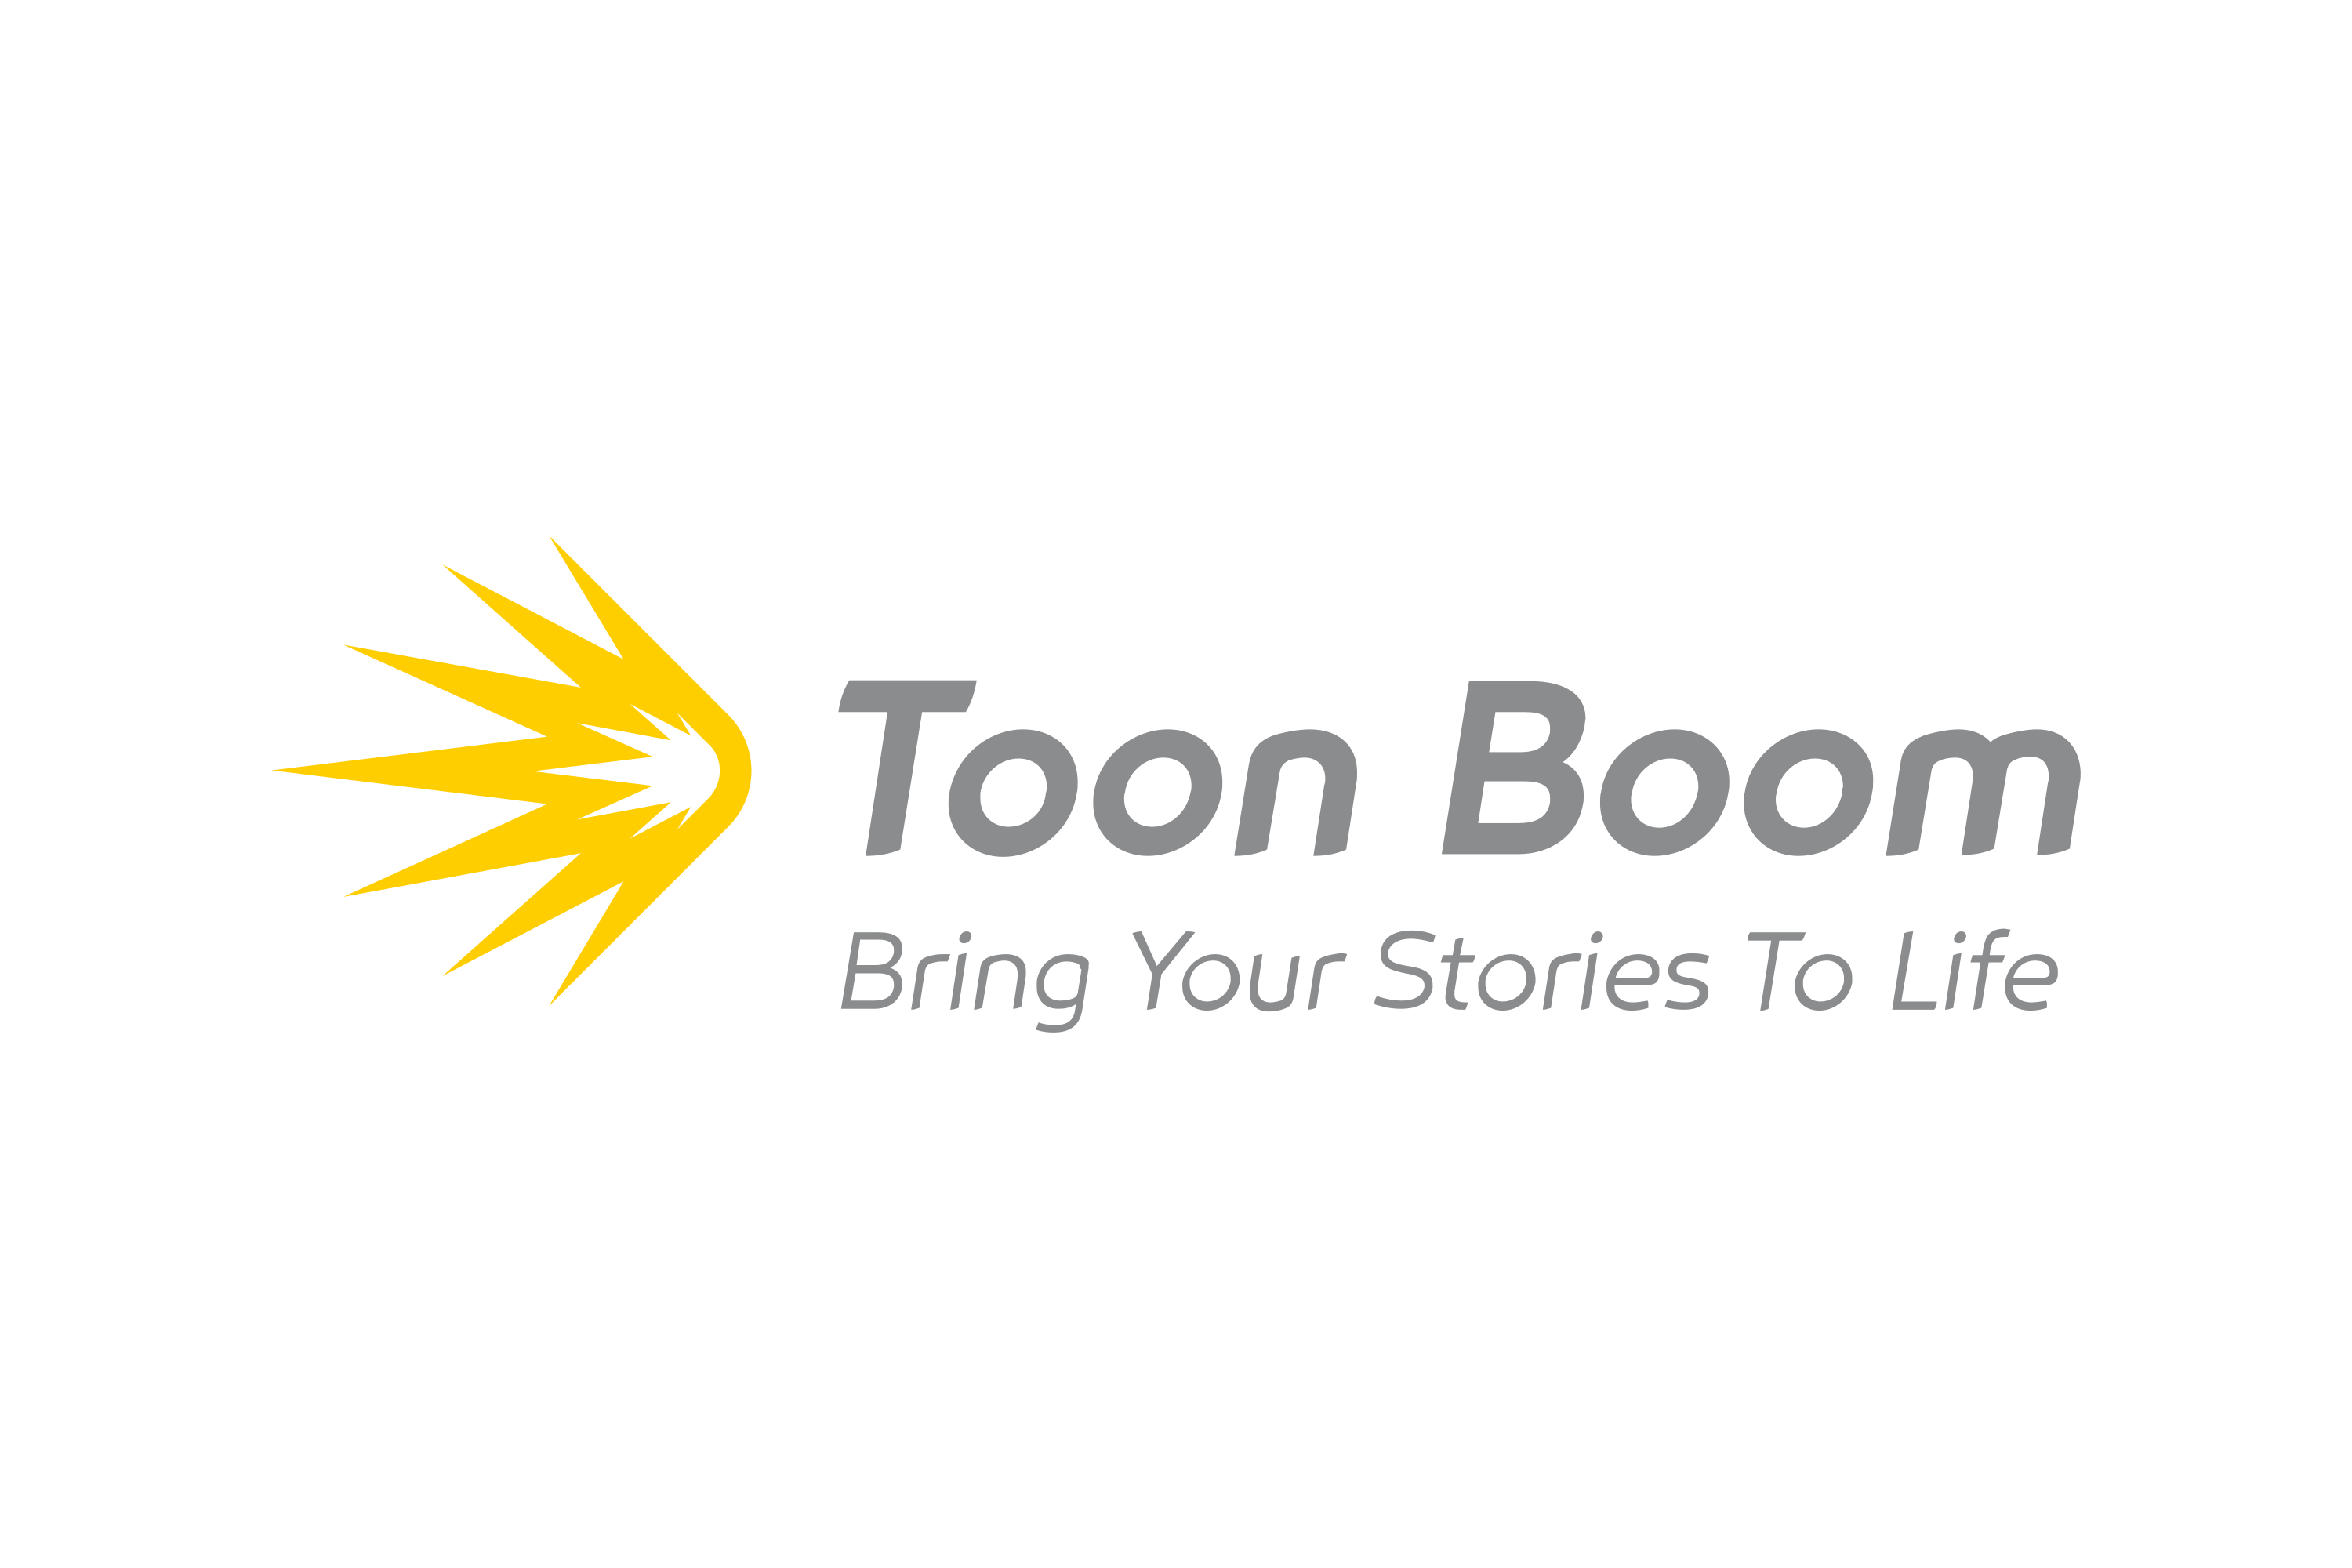 Download Toon Boom Animation Logo in SVG Vector or PNG File Format -  